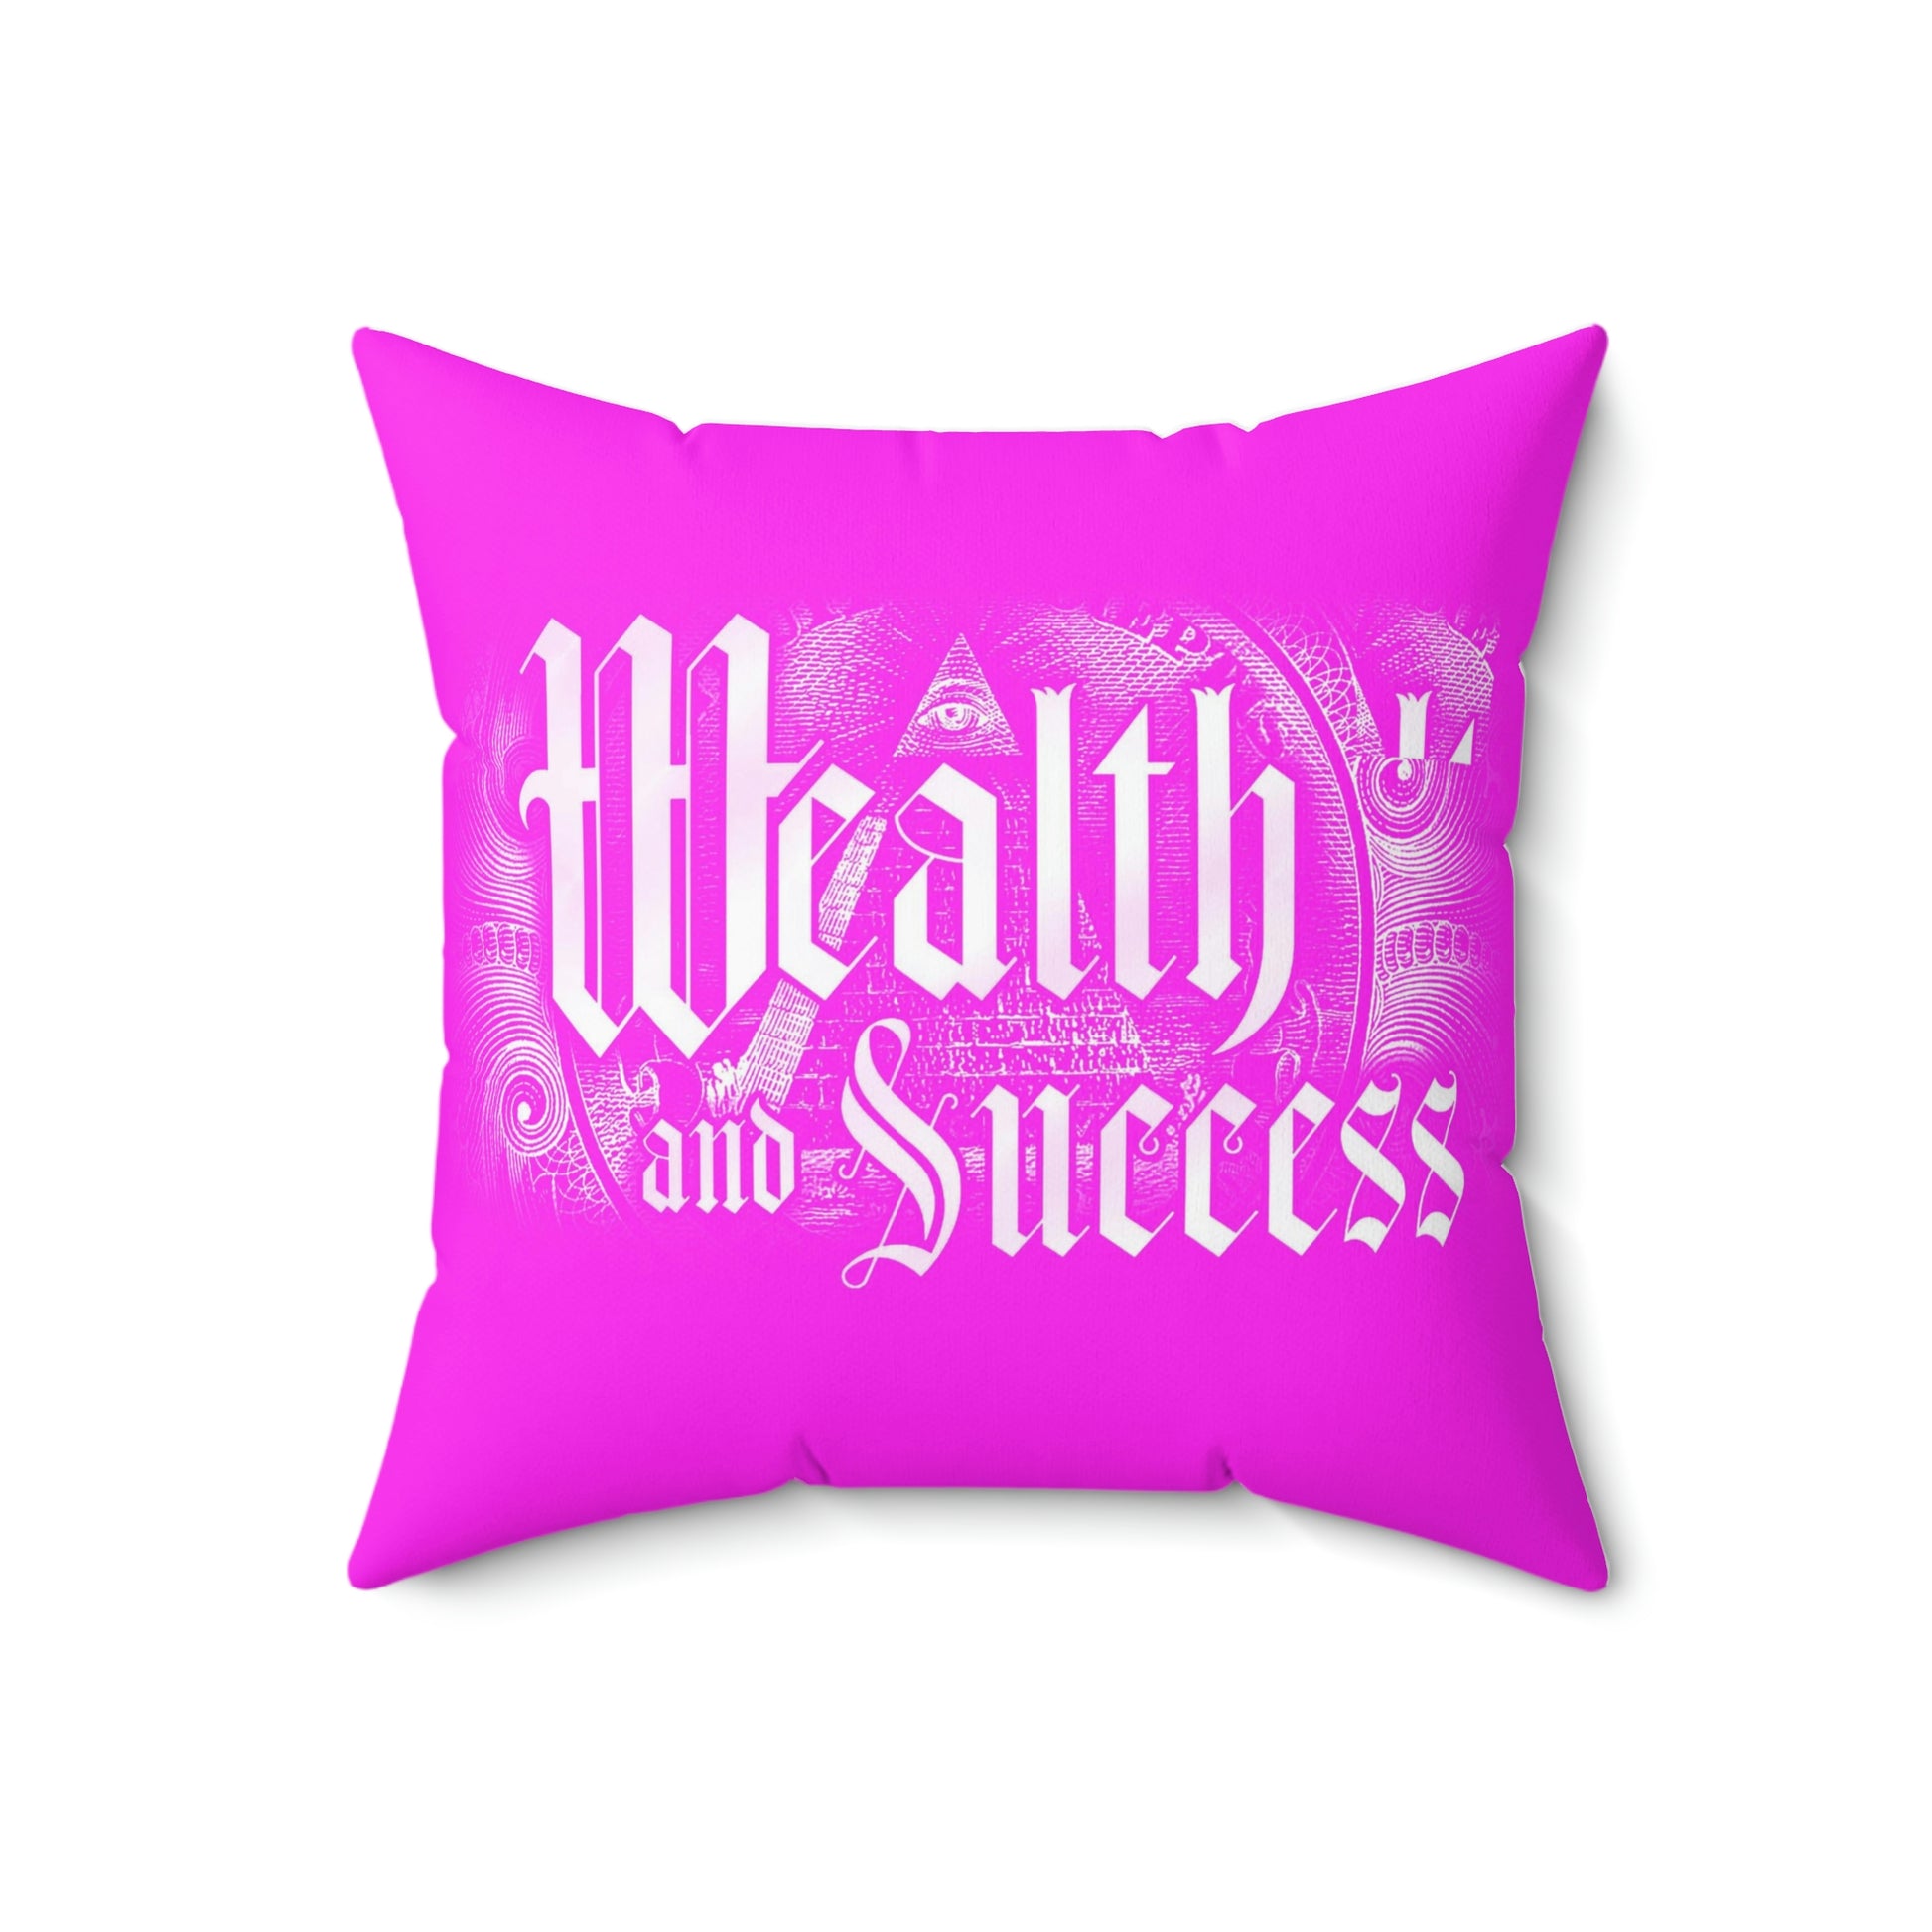 Geotrott Wealth and Success Motivational Pink Spun Polyester Square Pillow